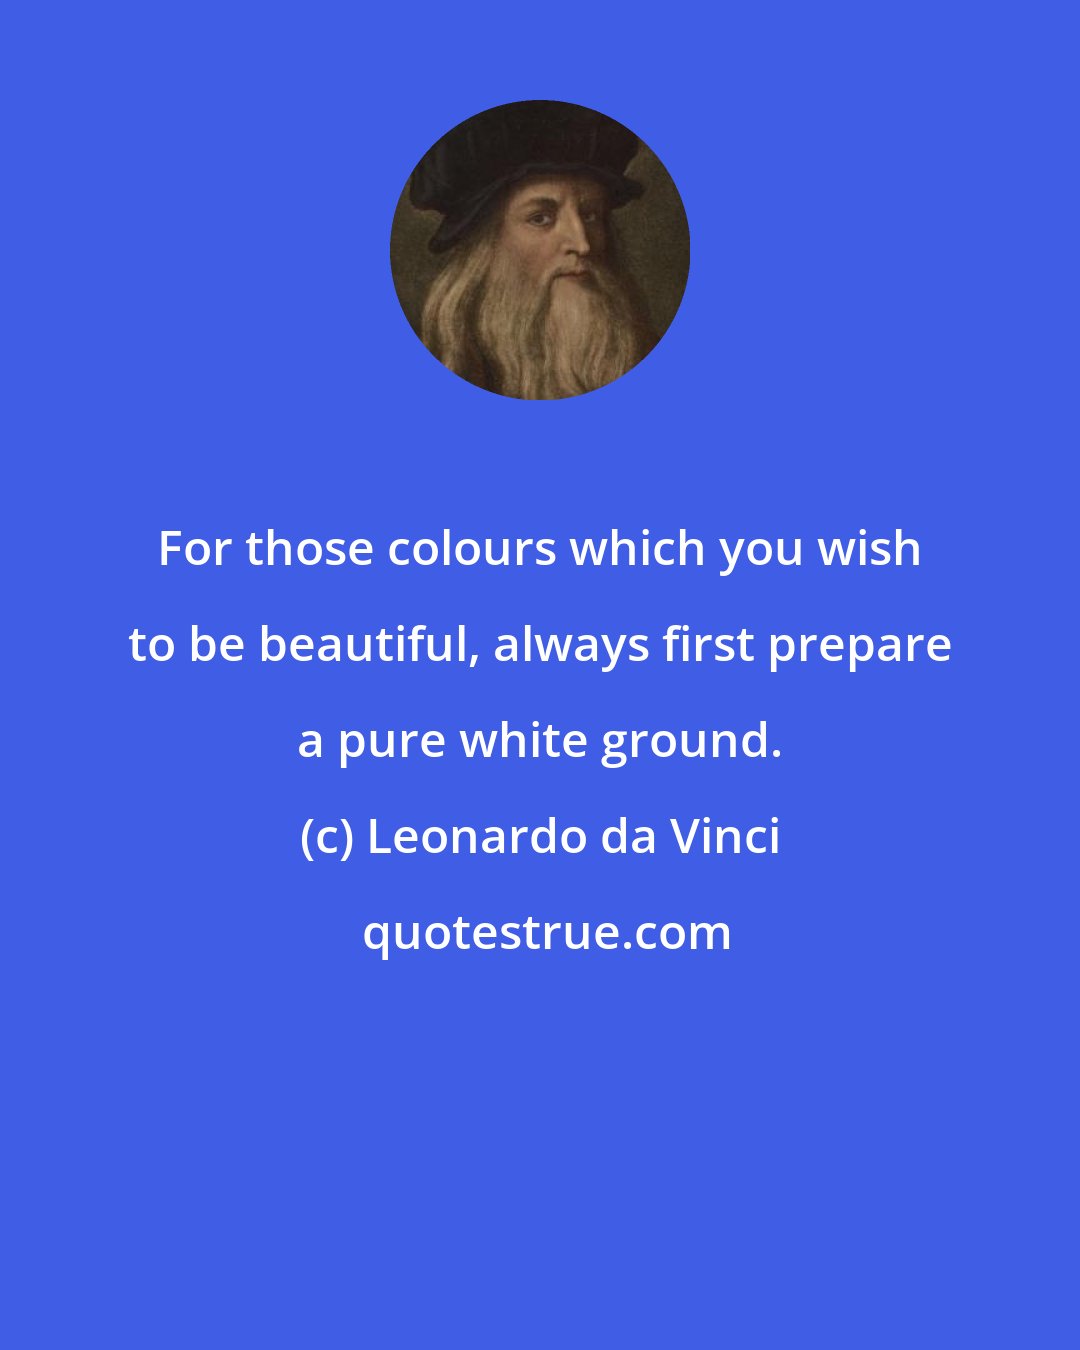 Leonardo da Vinci: For those colours which you wish to be beautiful, always first prepare a pure white ground.